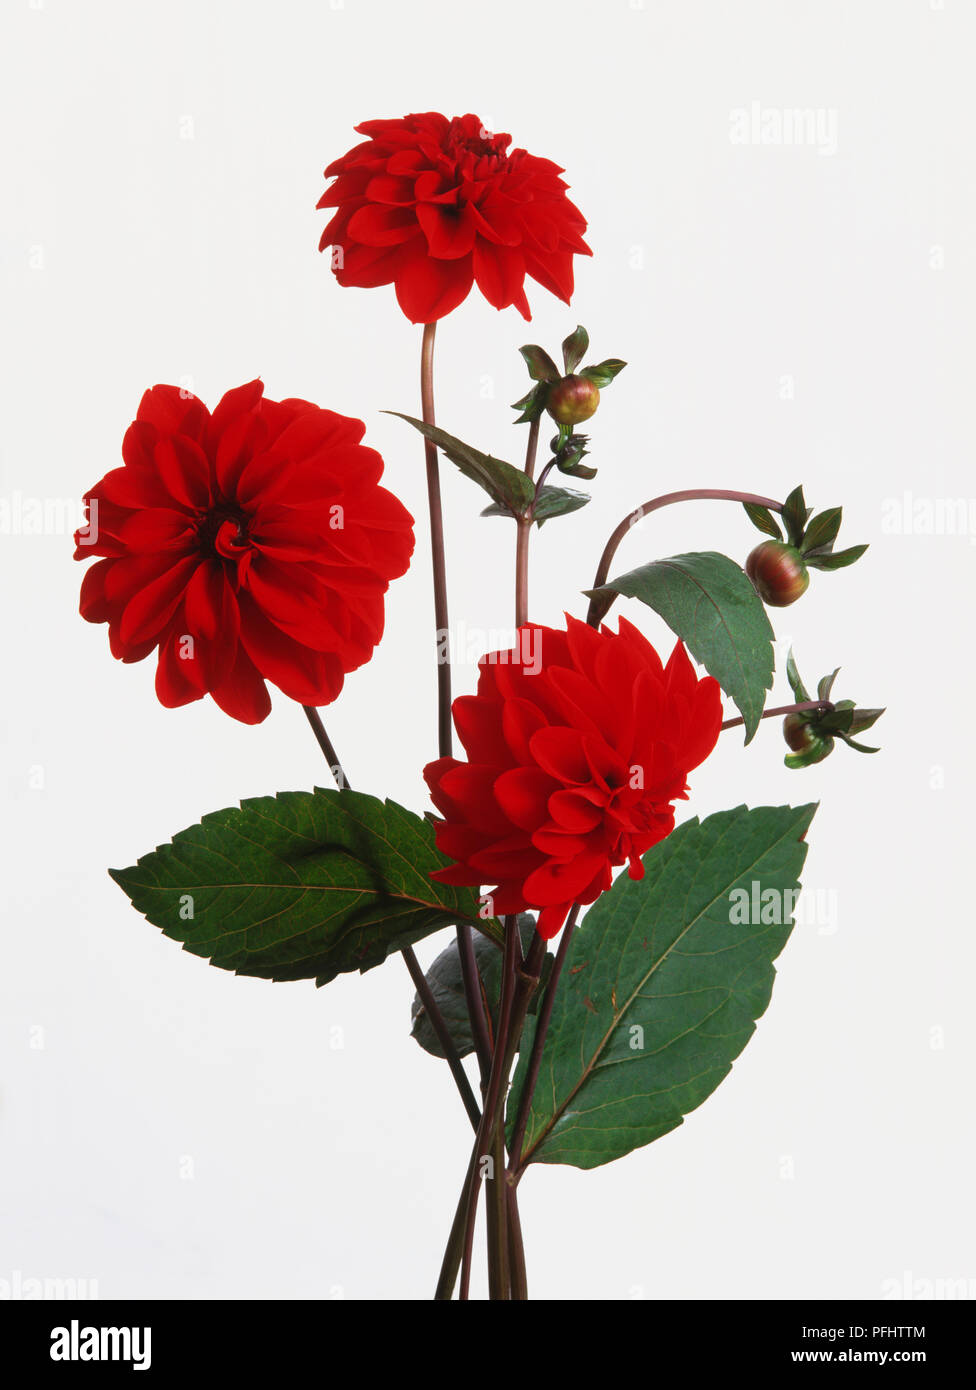 Dahlia 'Grenadier', three red flowers and buds, with large toothed green leaves. Stock Photo